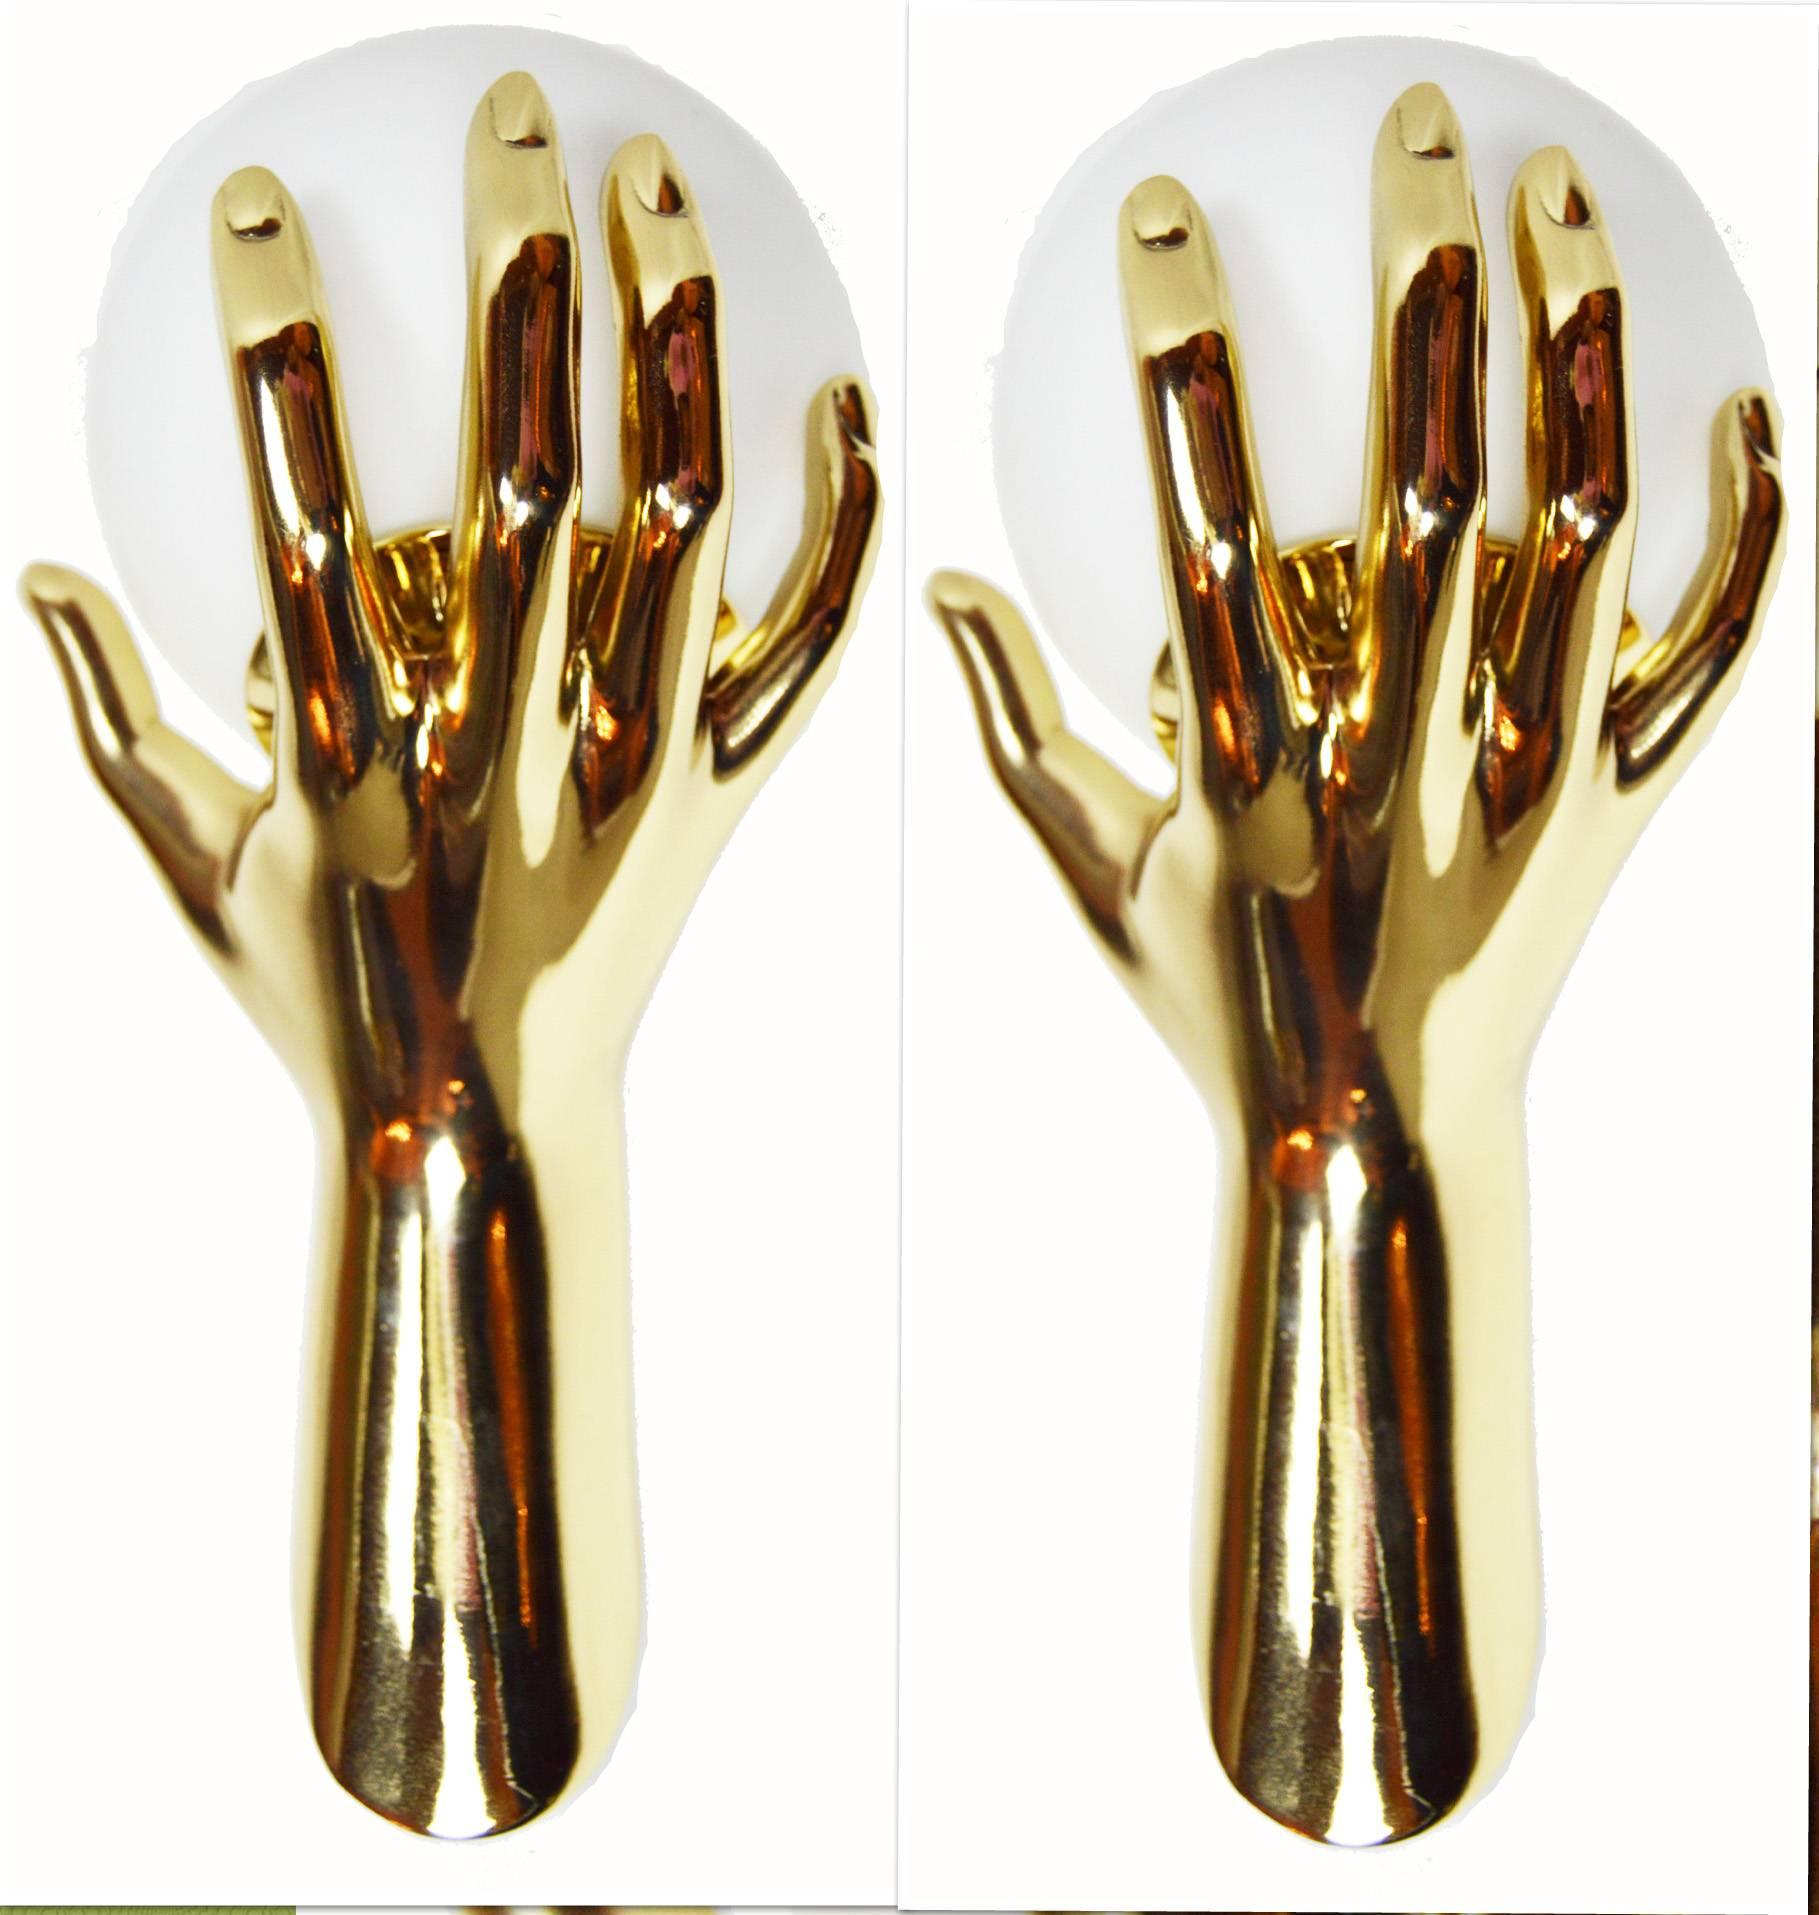 Fantastic  Pair of Sconces by Maison Arlus, figuring a gold hand holding an opaline glass globe
Provenance : Parisian hotel ( Rive Gauche )
US wired and in working condition.
Have a look on our impressive collection of French and Italian Mid Century